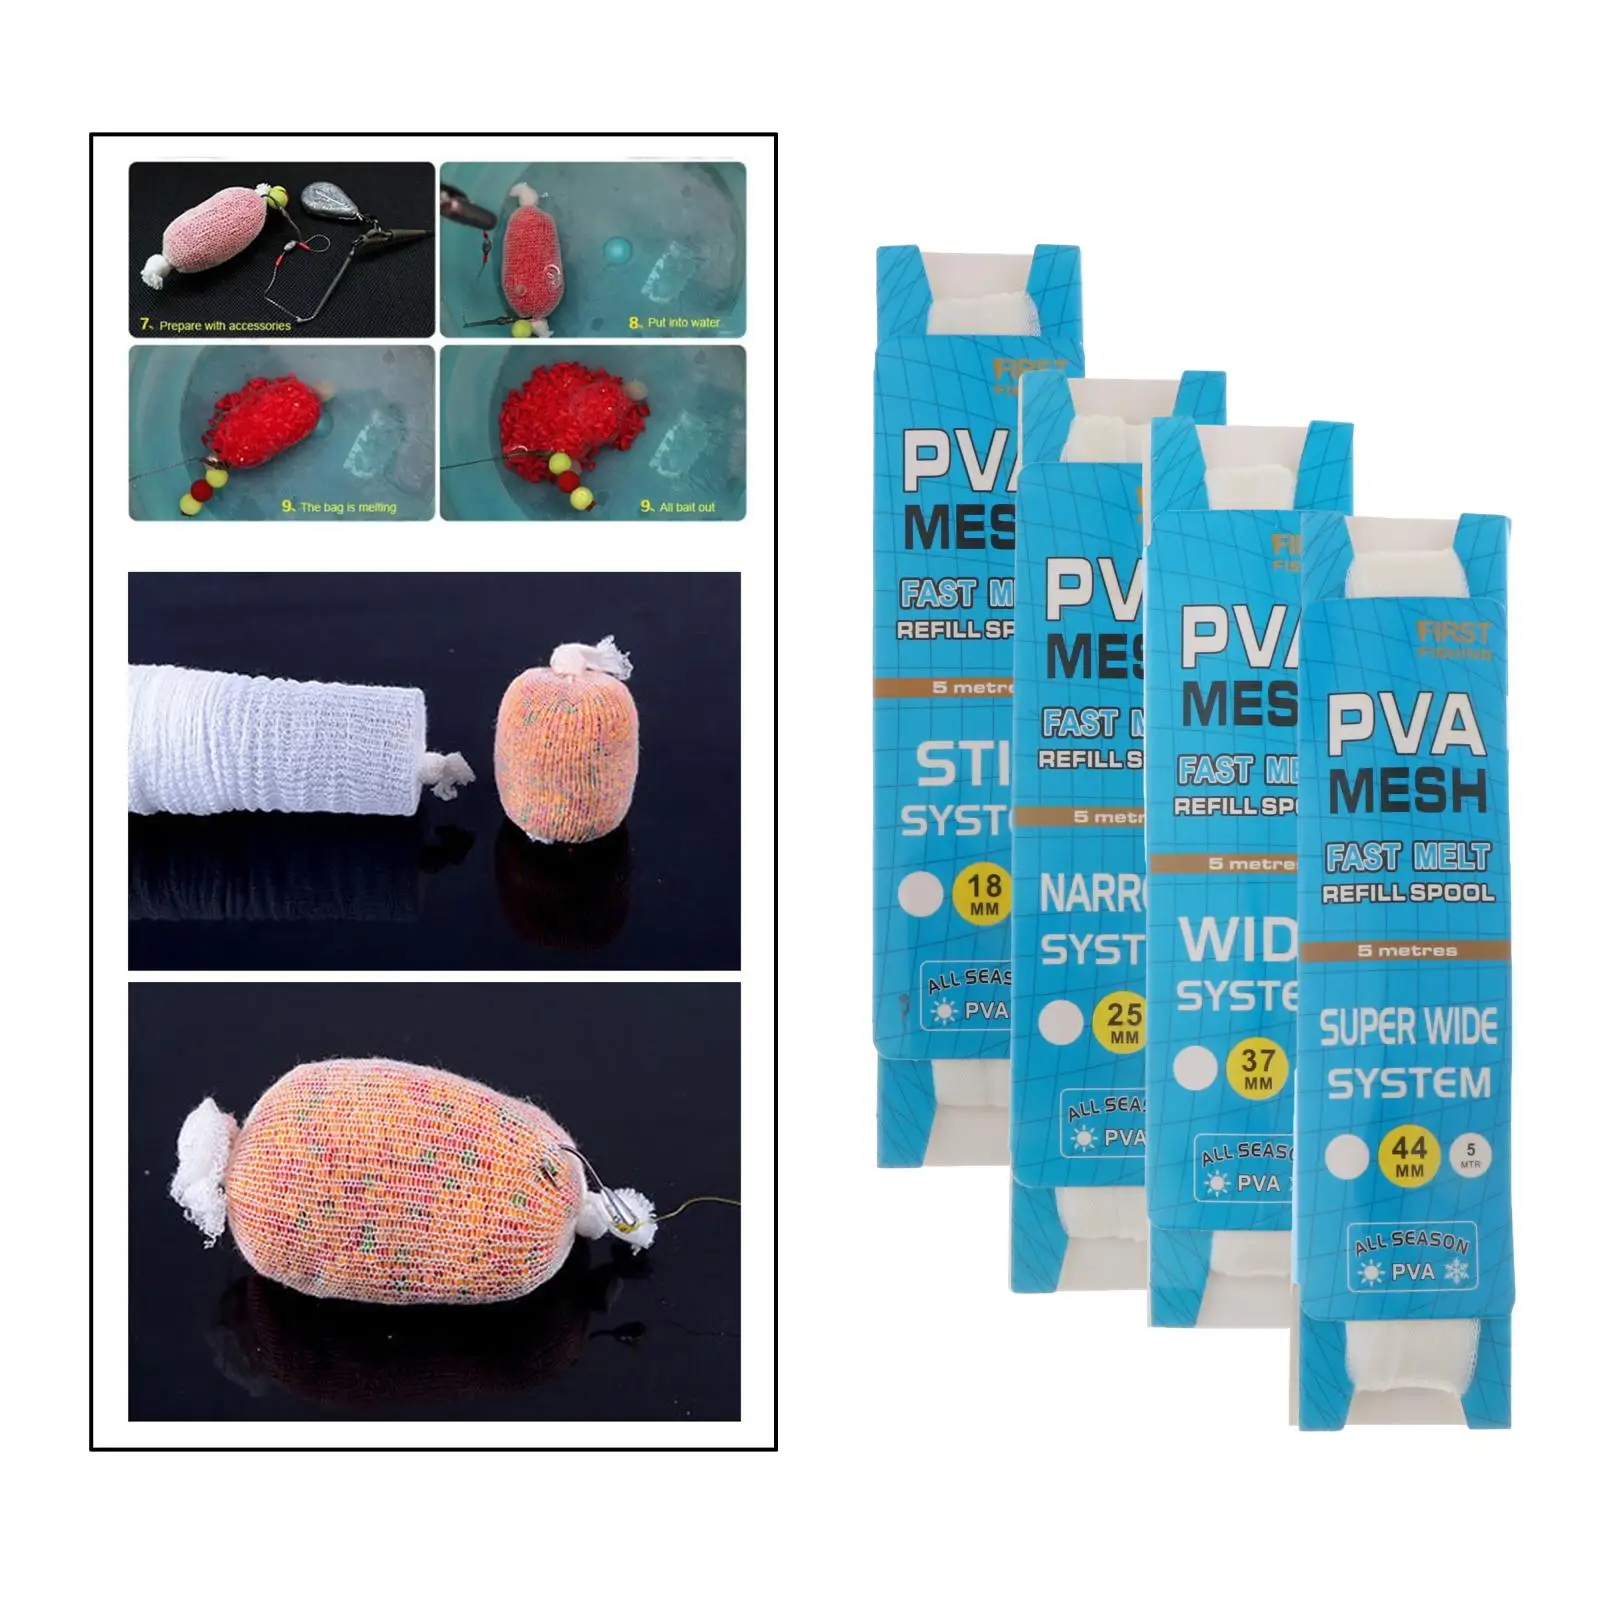 PVA Fishing Bait Net Catfish Water Soluble Hard Solid Refill Stocking Tackle Bag